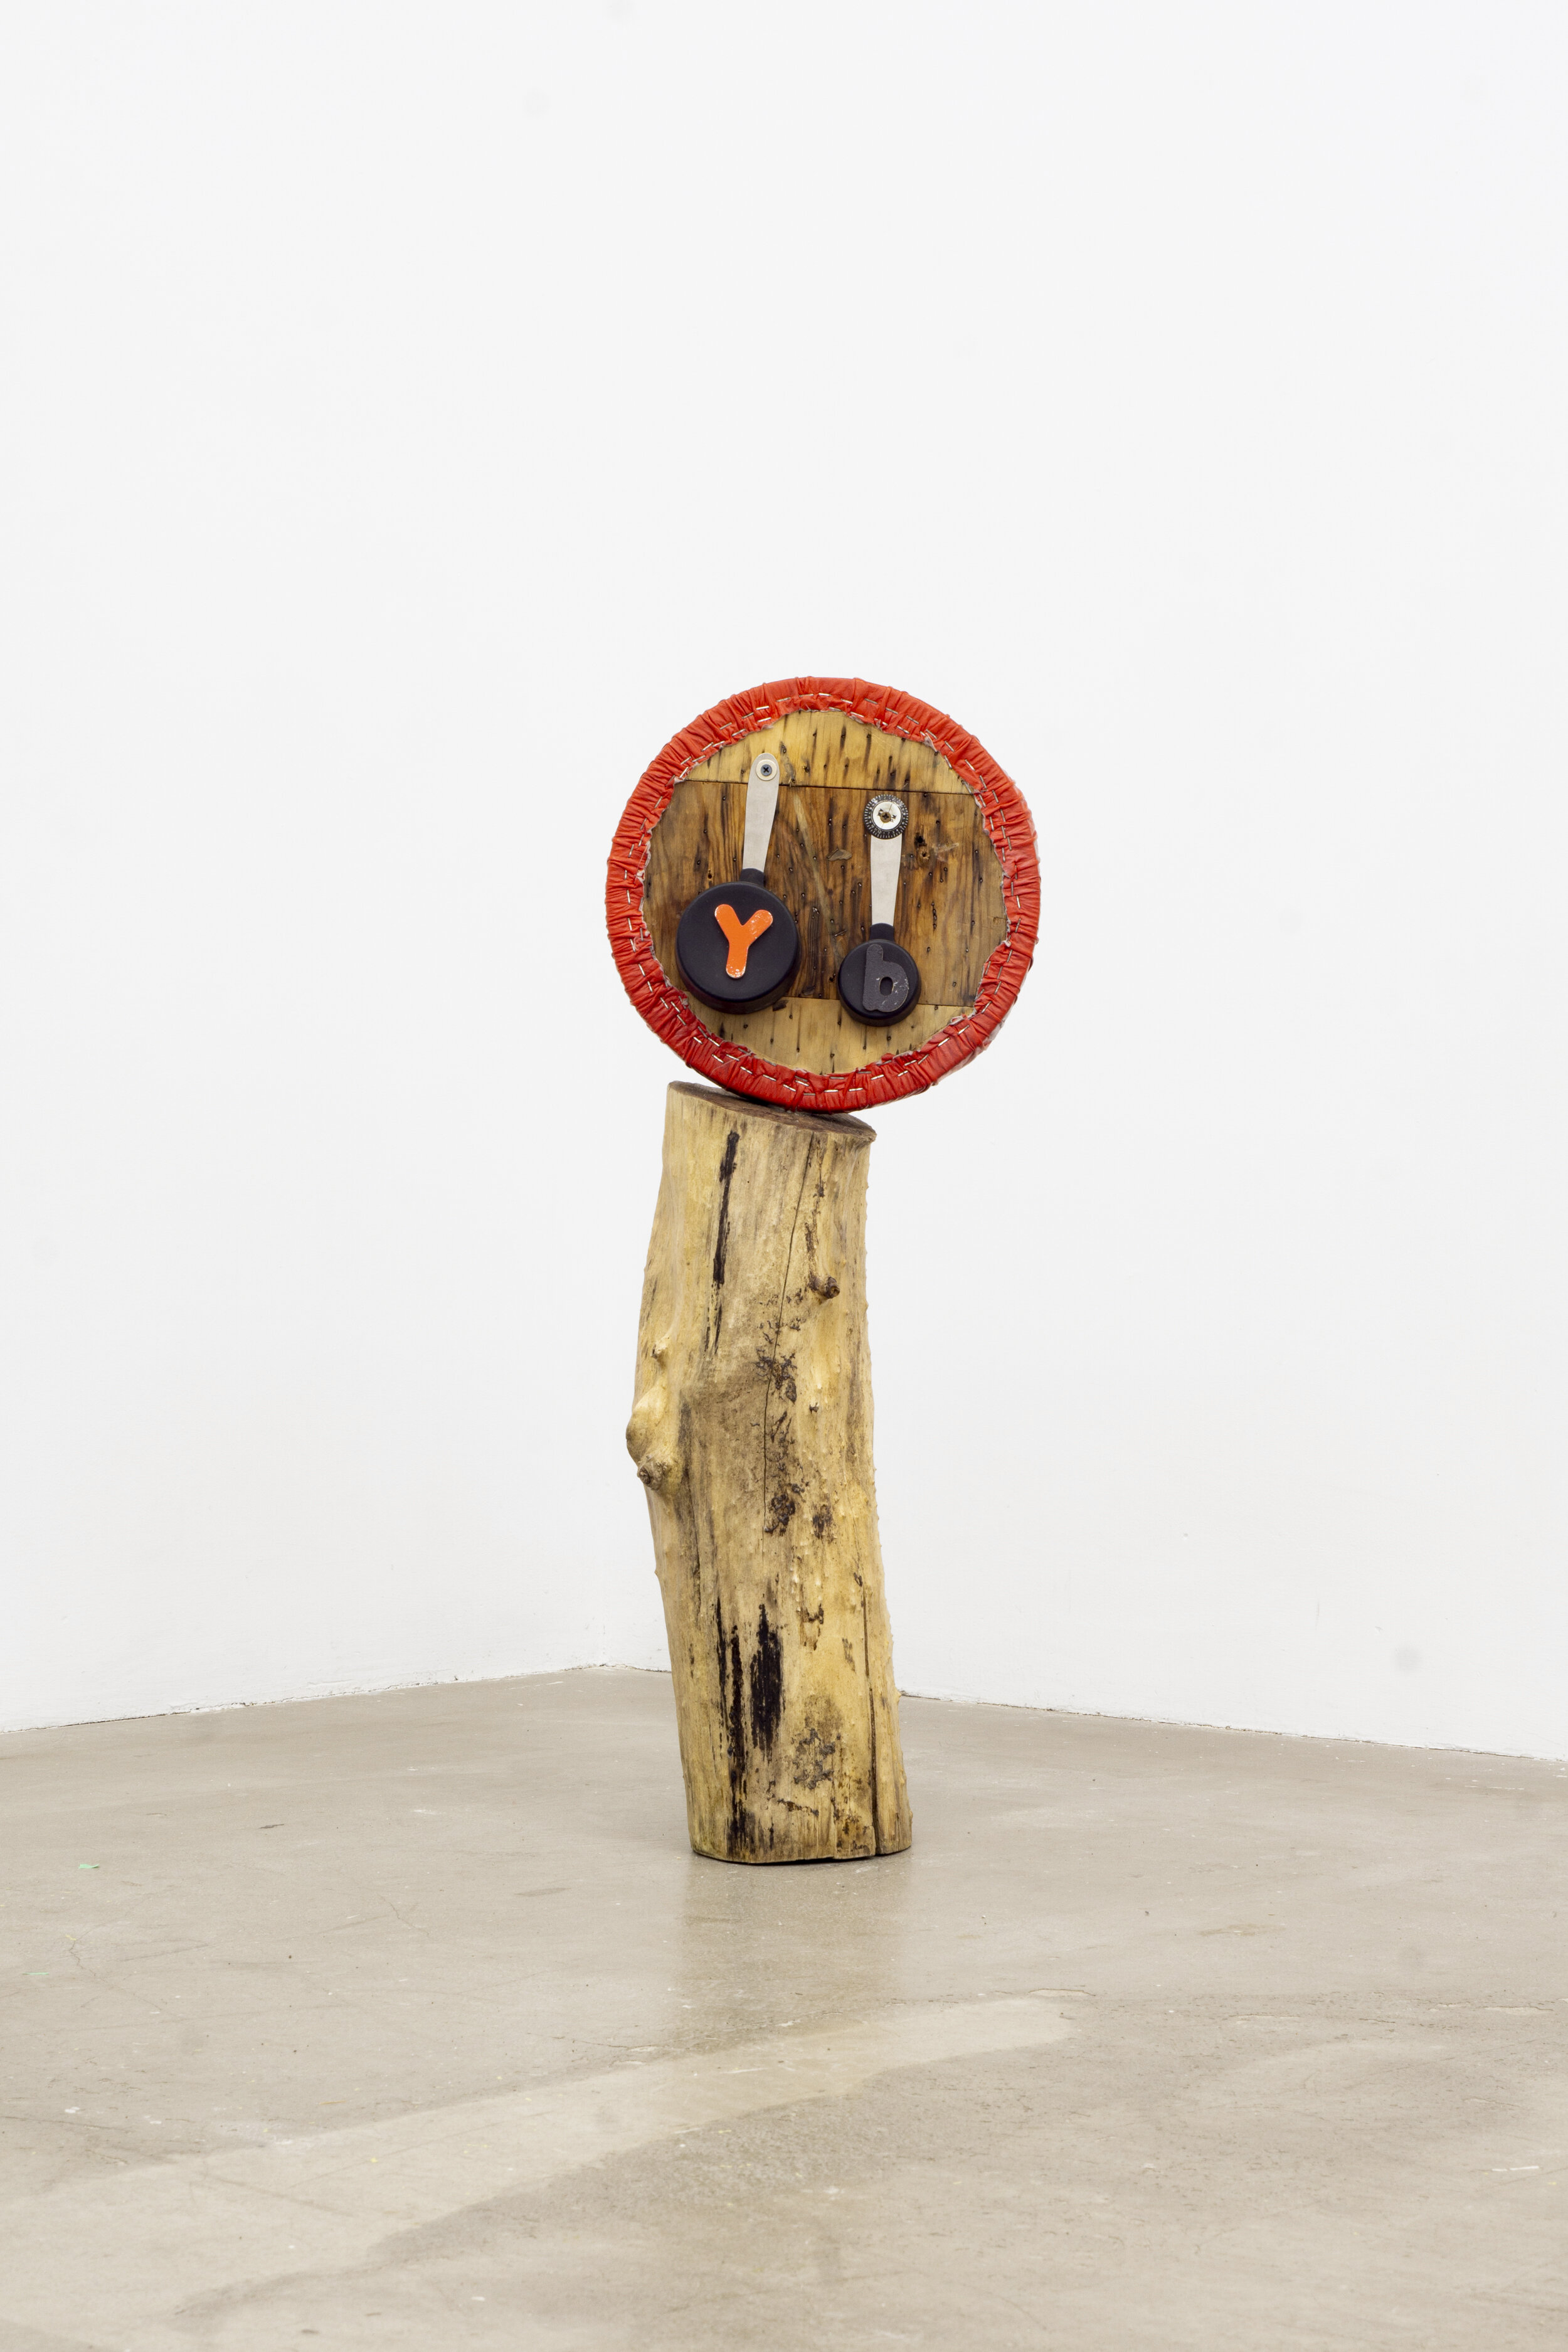  Georgia Dickie,  In awe of plum loin , 2021, Found objects, stool cushion seat, measuring cups, wood, and wood stain 33 x 12 x 8 in (83.8 x 30.5 x 20.3 cm)   